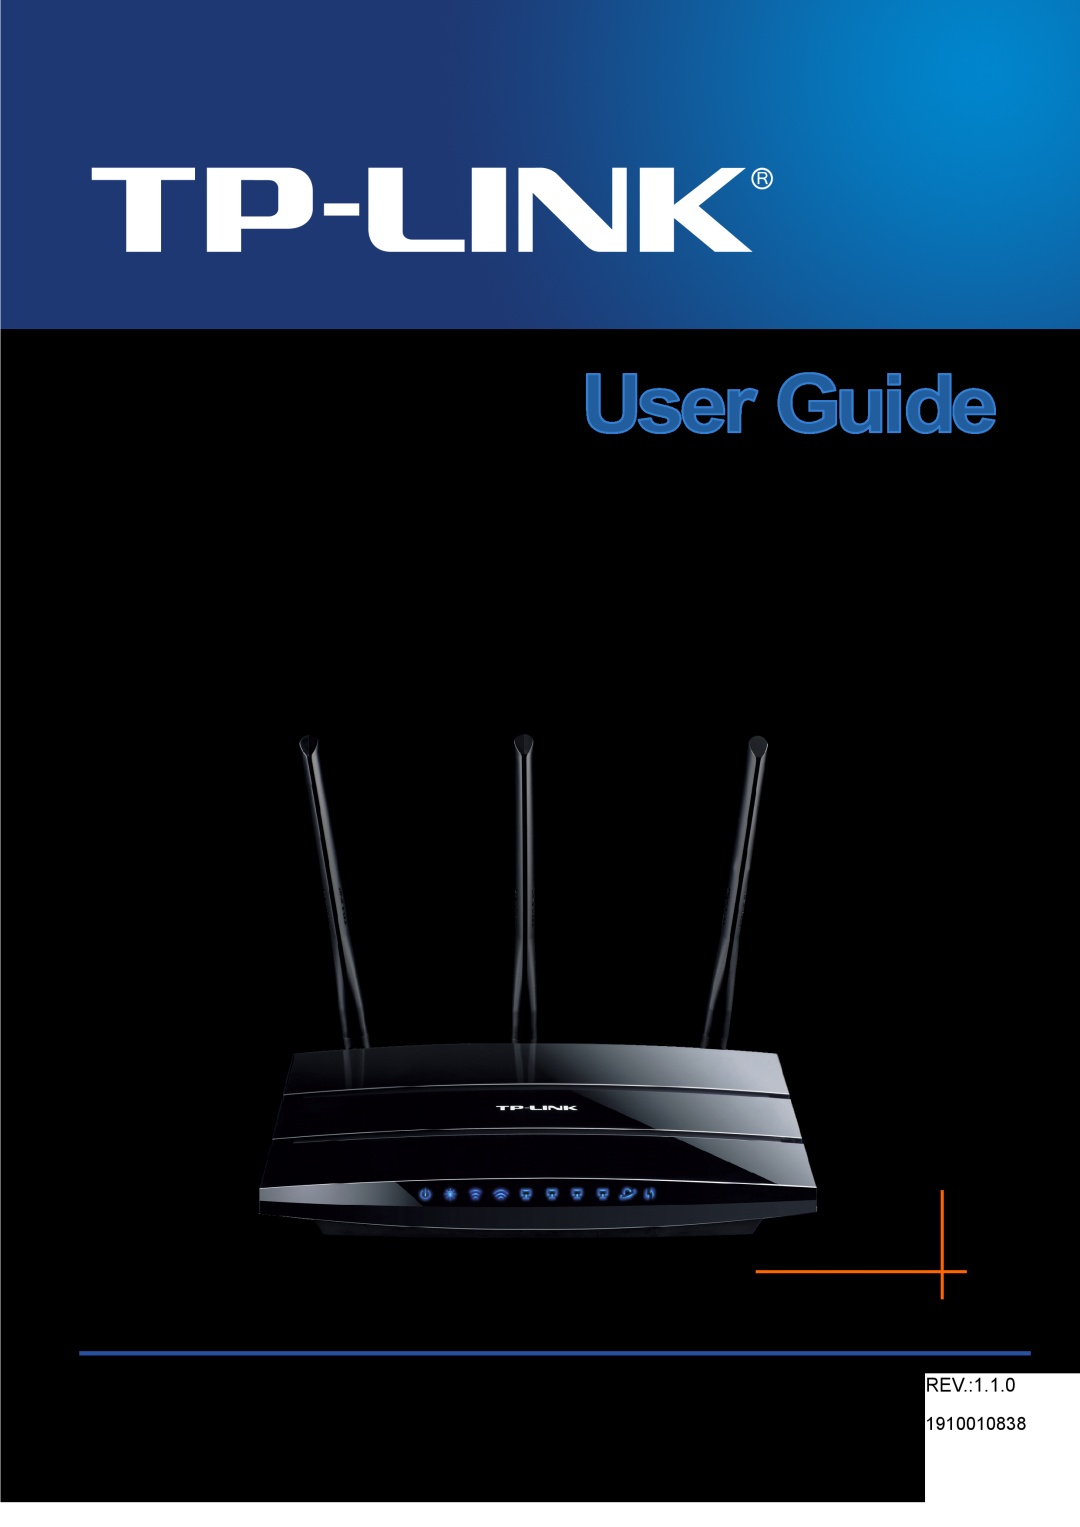 TP-Link TL-WDR4300 manual N750 Wireless Dual Band Gigabit Router, 1910010838 